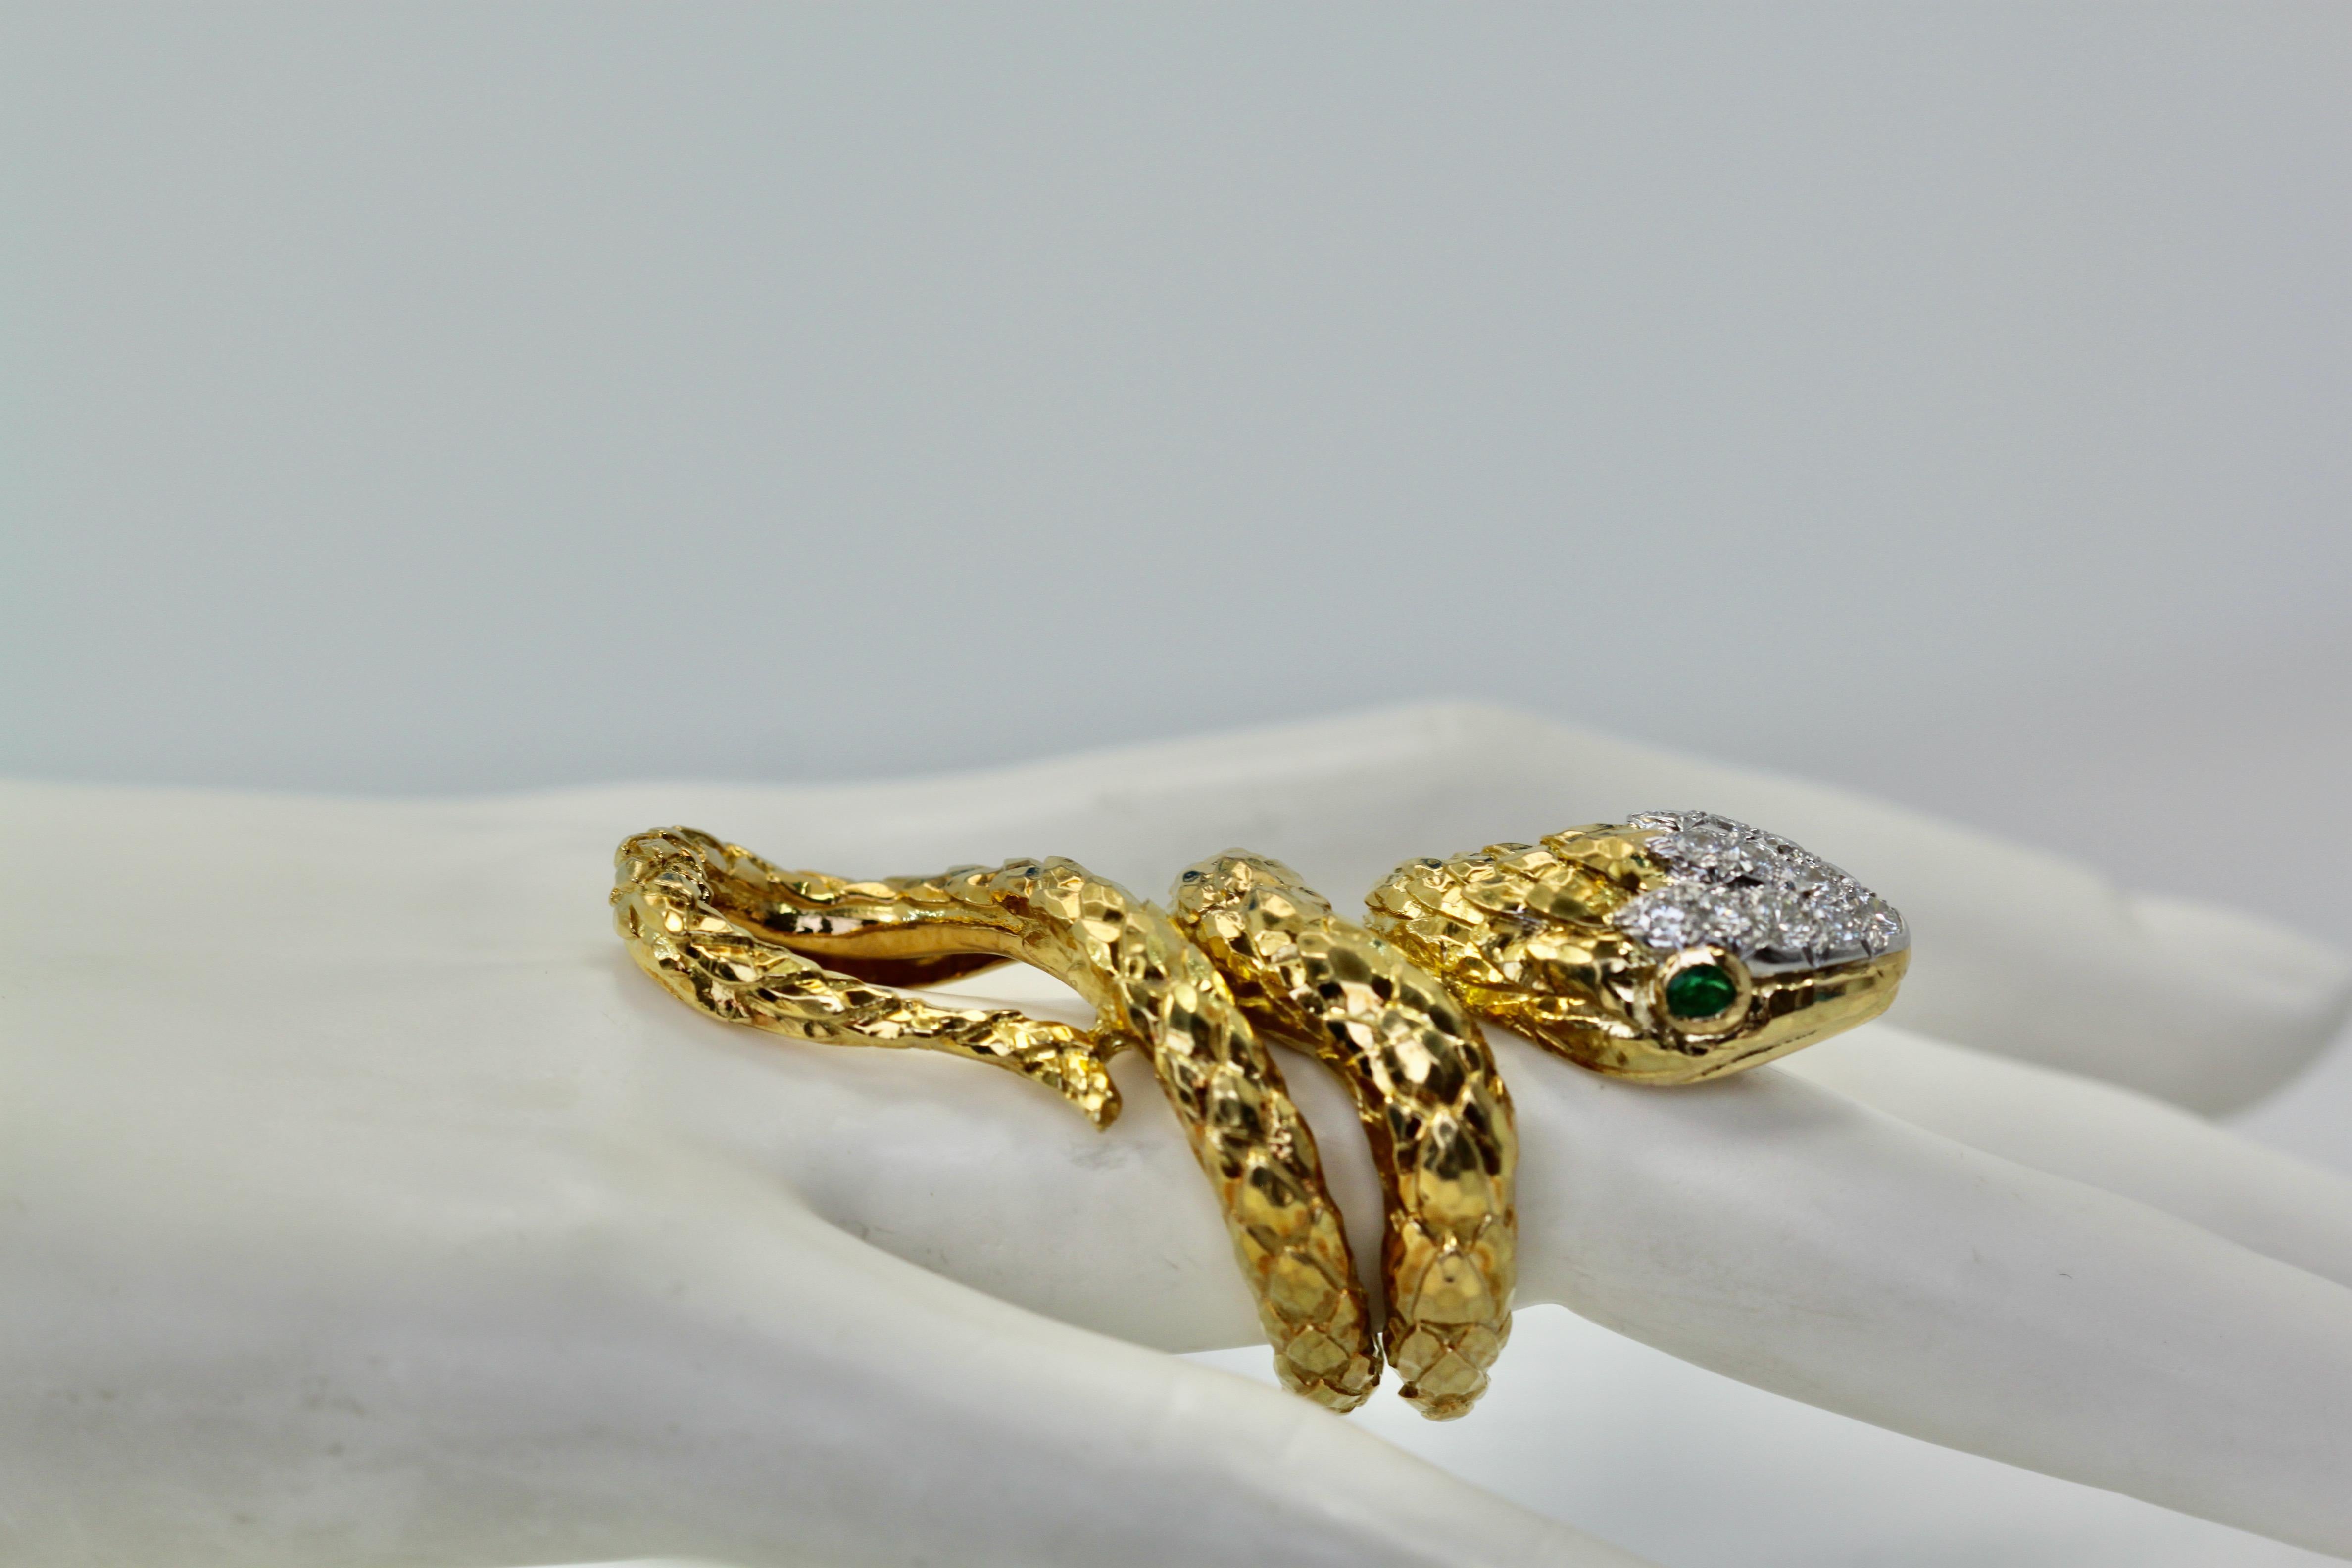 This David Webb ring is a bit unusual as it has a nice hand carved textured snake body with a curl to his long tail.  The two eyes are Emerald and it has a full Diamond head set in platinum, the body of the ring is 18K yellow gold.  This piece is